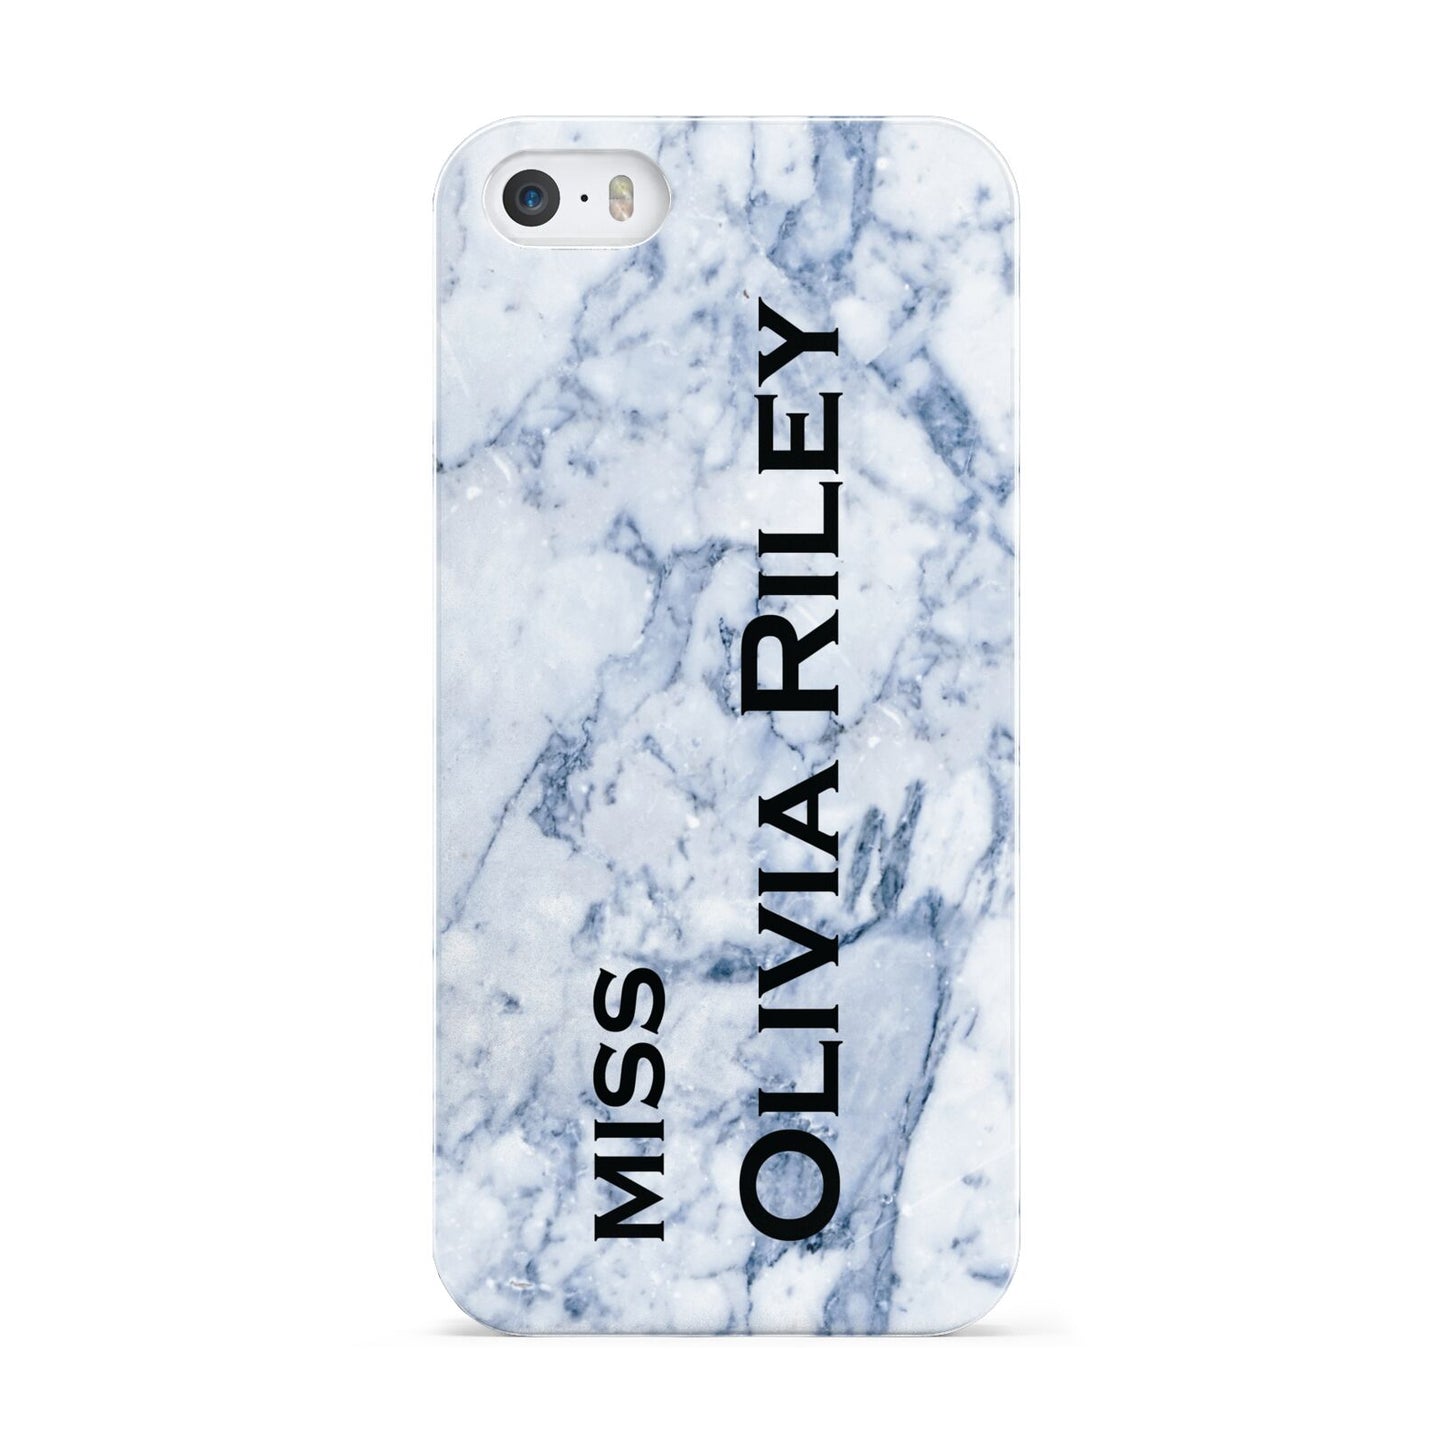 Full Name Grey Marble Apple iPhone 5 Case